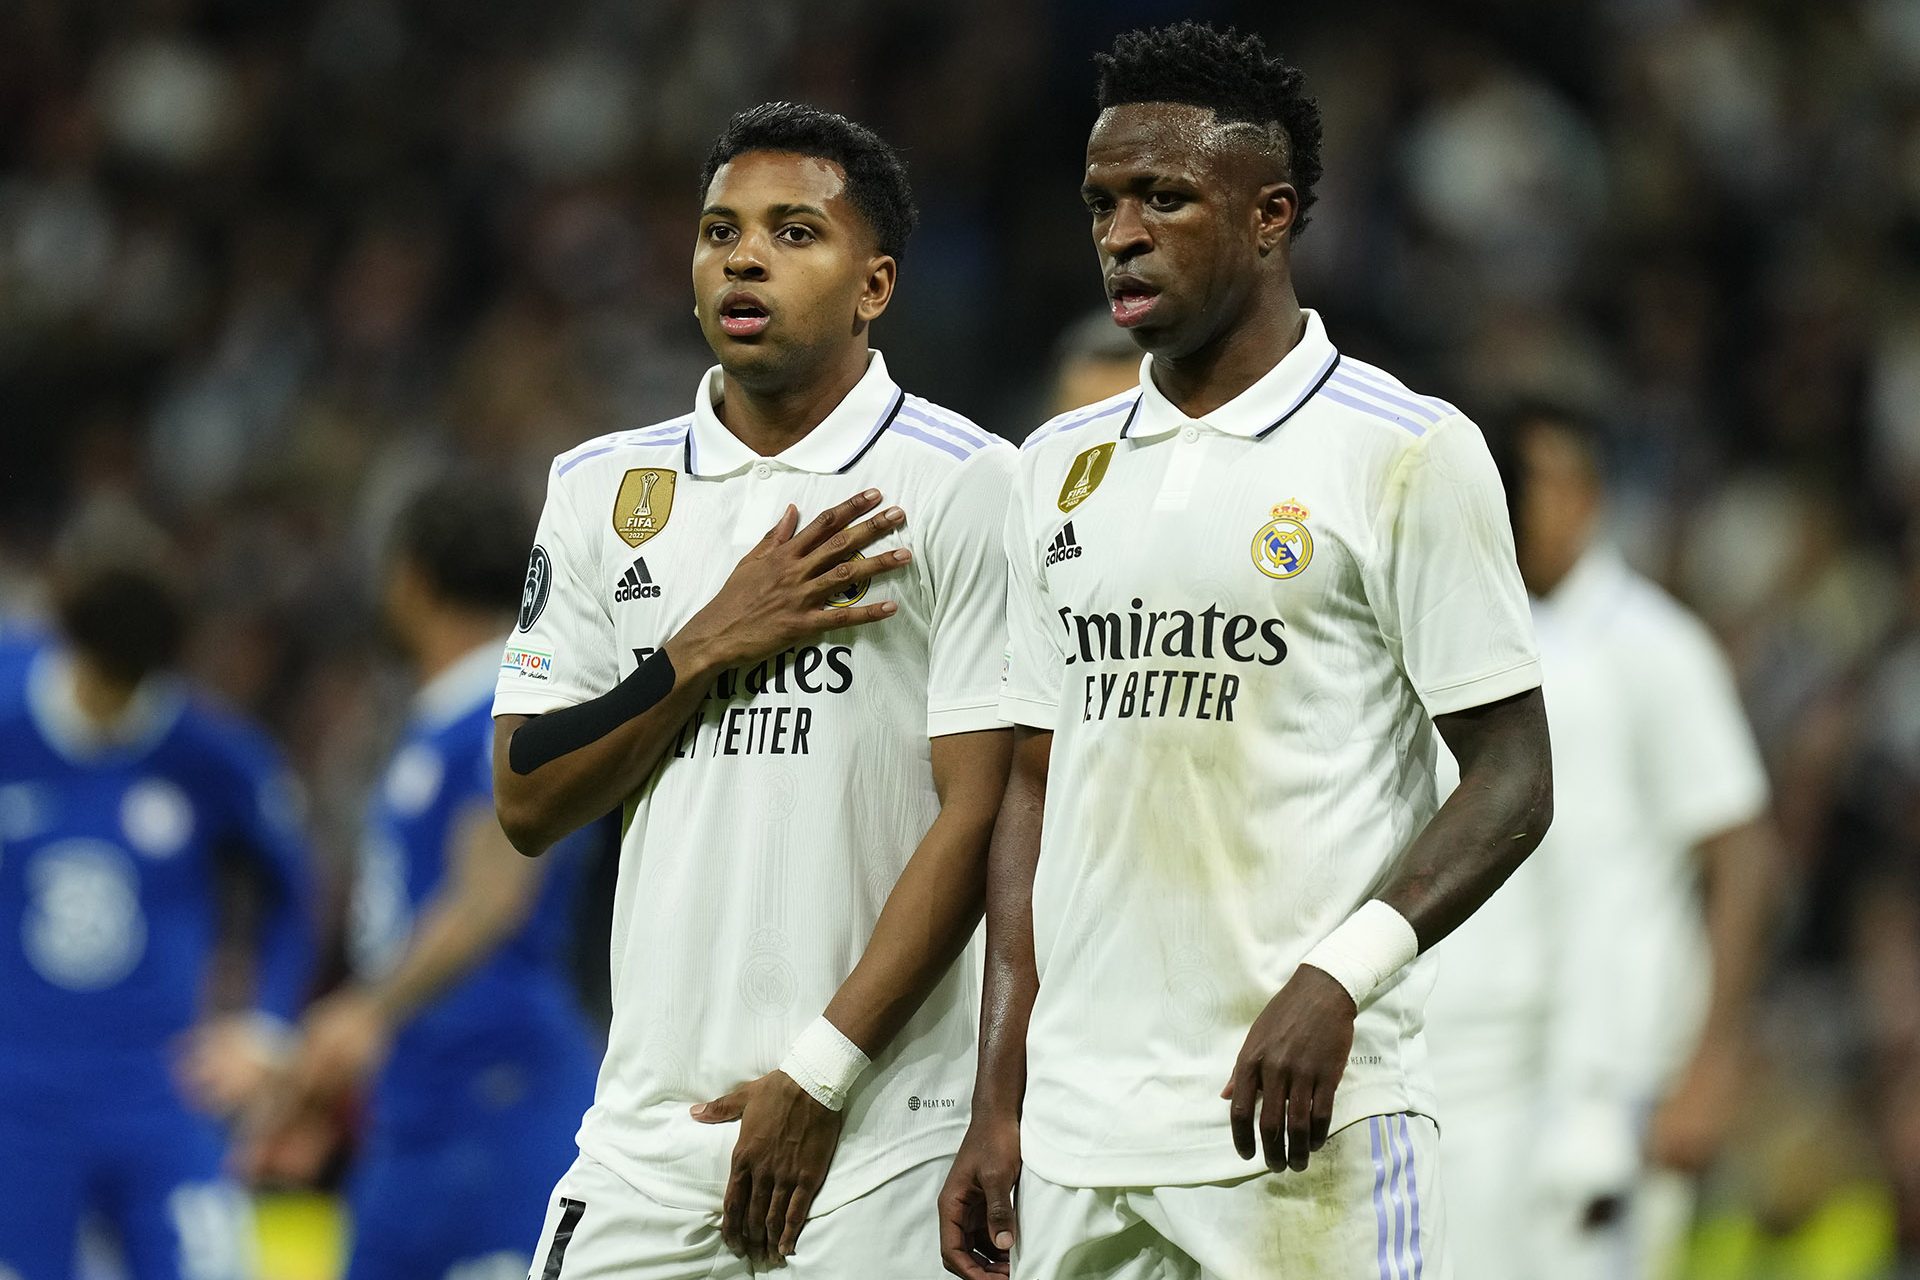 Real Madrid needs to strengthen its forward line